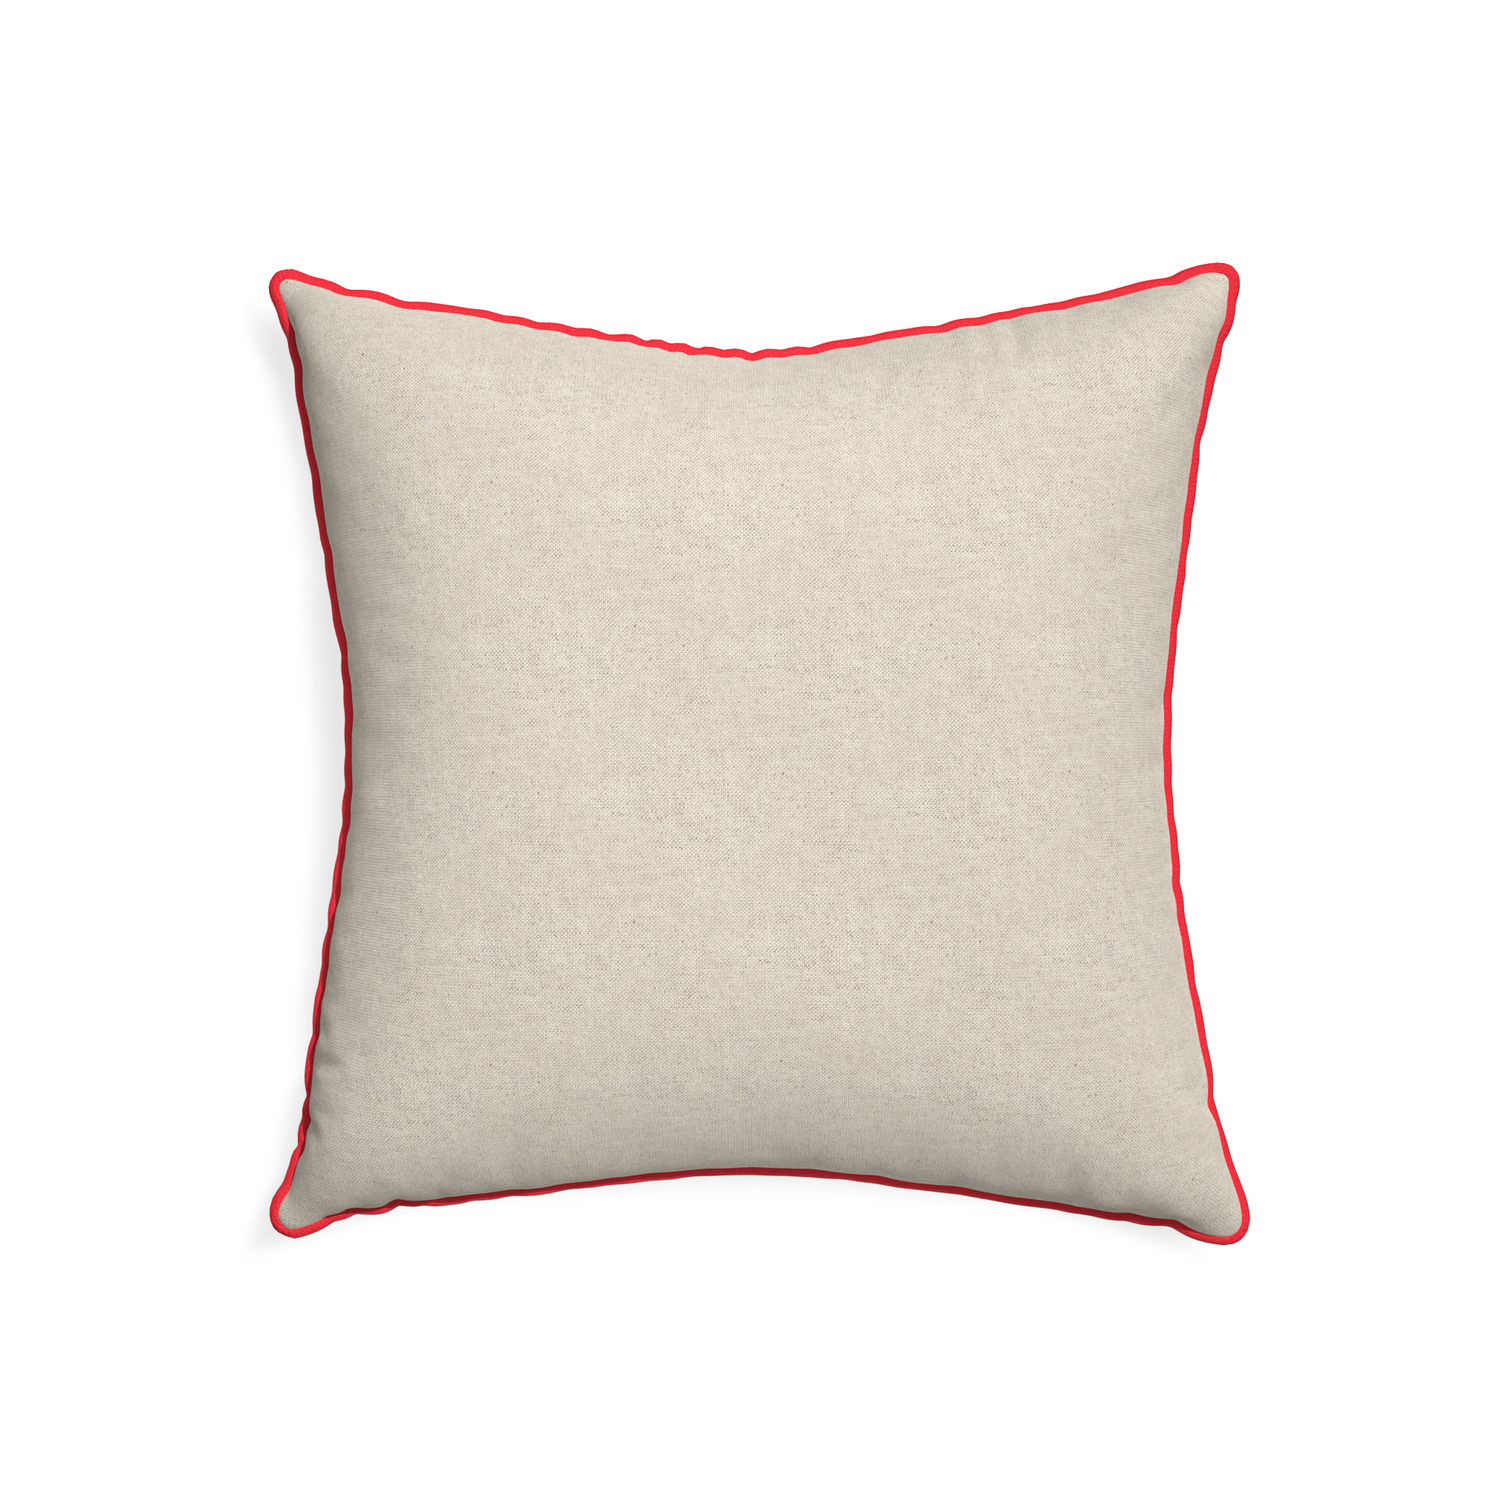 22-square oat custom light brownpillow with cherry piping on white background